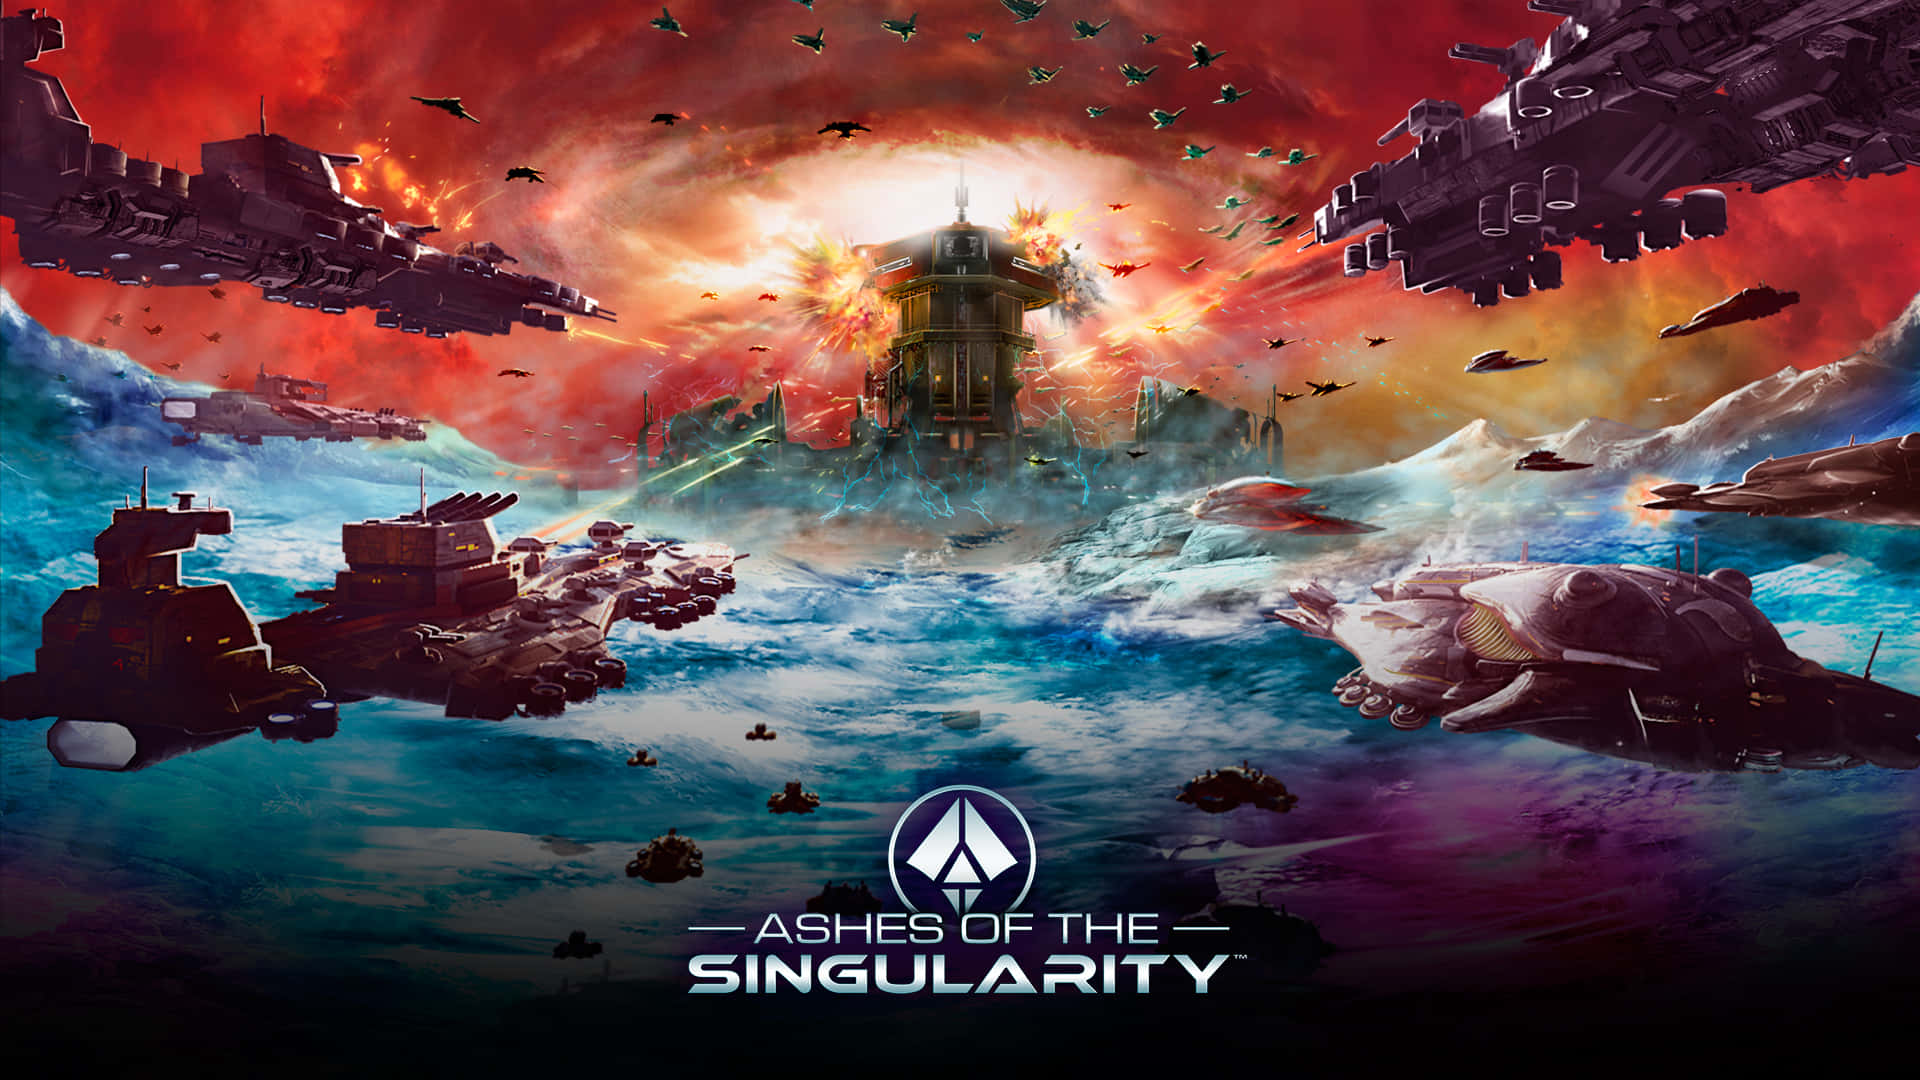 A Poster For A Game Called Aces Of The Singularity